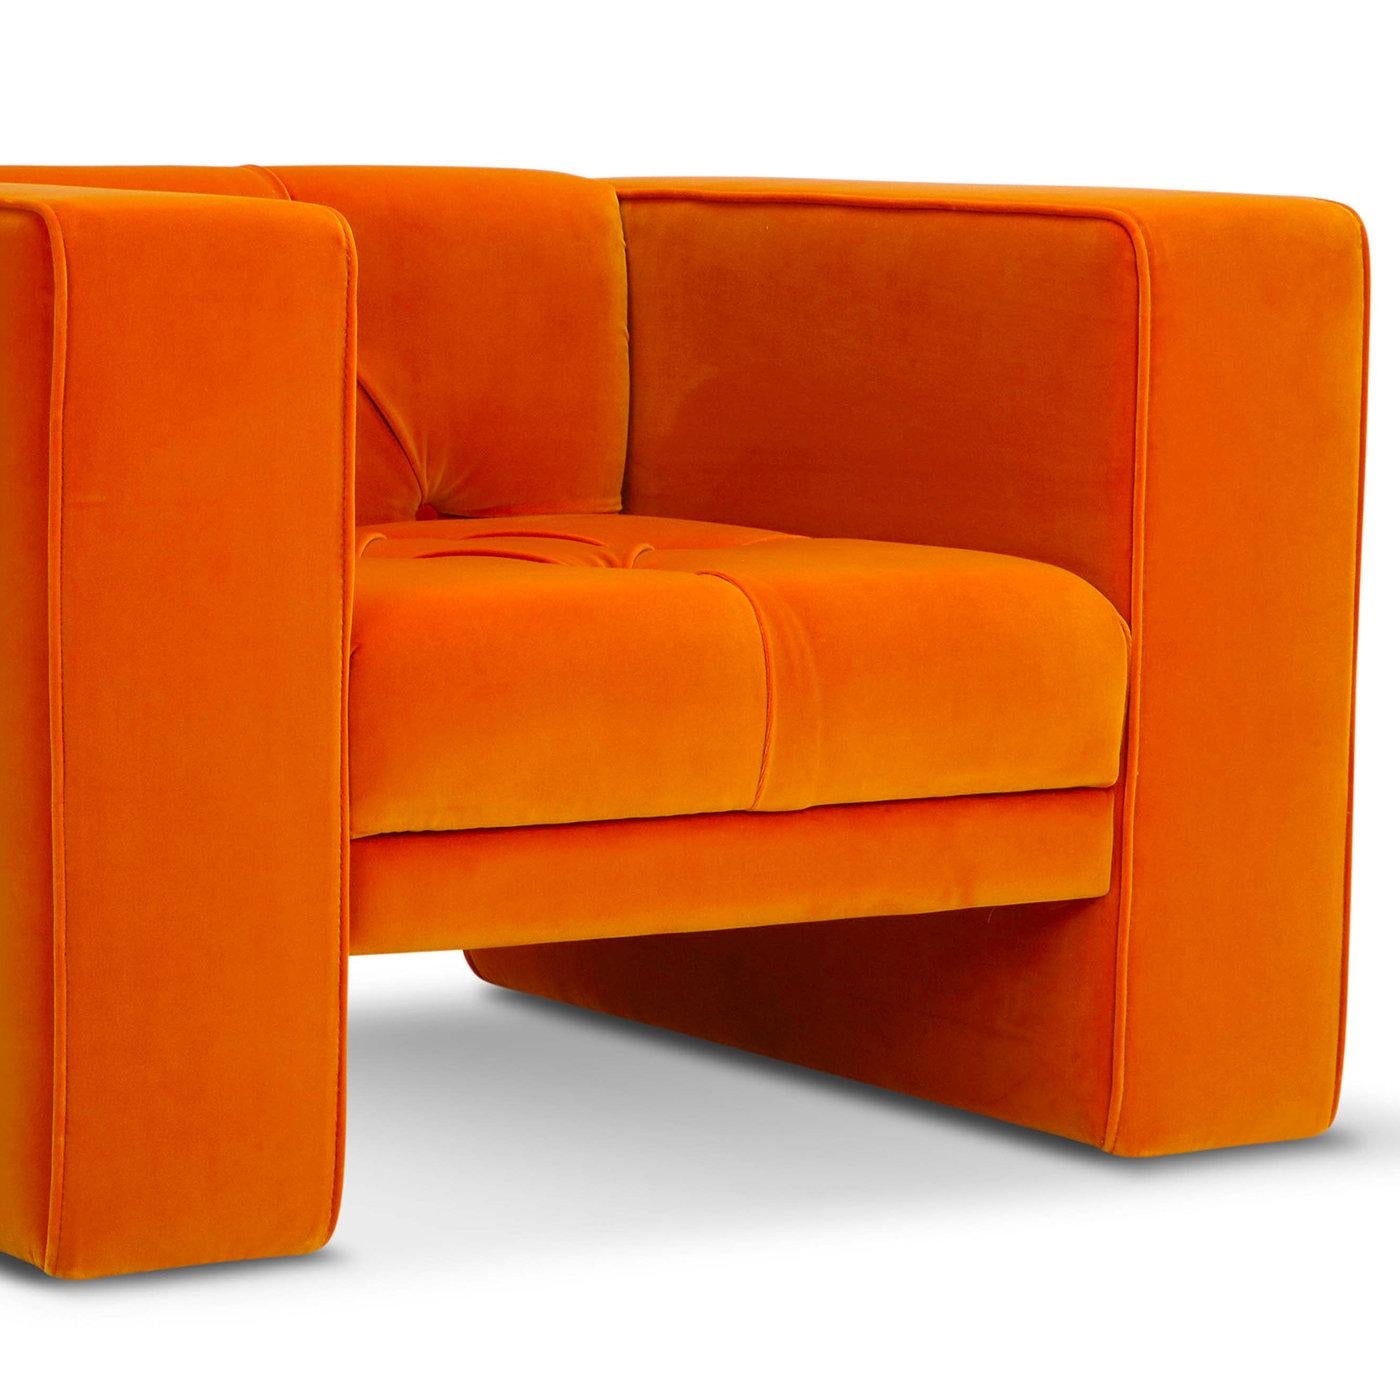 Generously sized and bold, this armchair is effortless in its simplicity, boasting a comfortable, multi-density polyurethane padding that supports the modern, linear silhouette upholstered in vibrant orange Dacron. Seat and back cushions form an